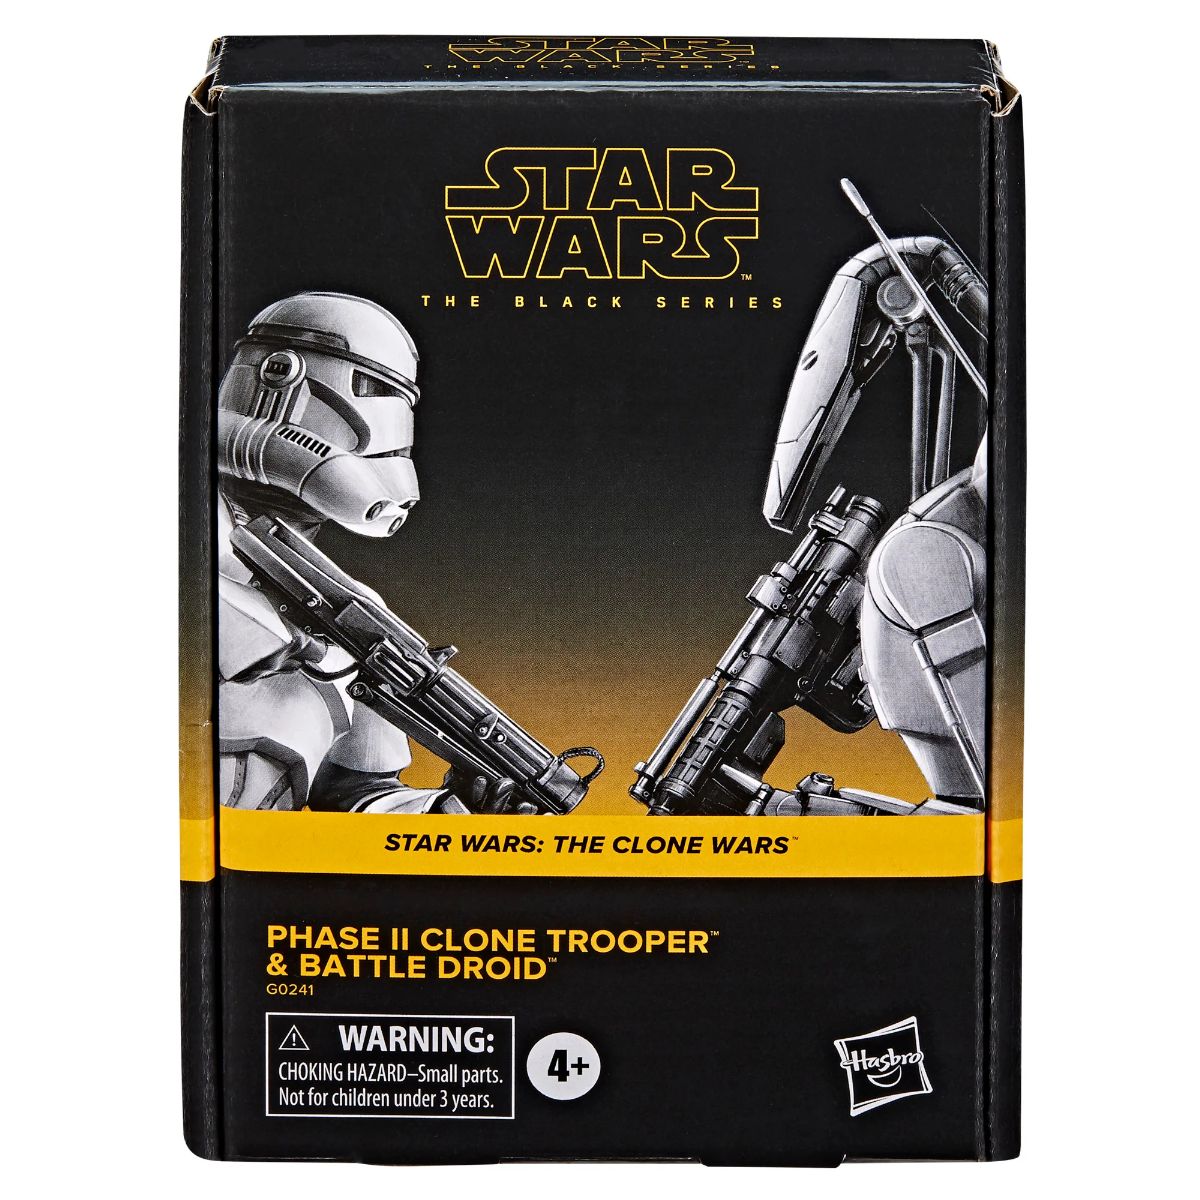 Star Wars TBS tCW Phase II Clone Trooper and Battle Droid 6-Inch Action Figure 2-Pack画像